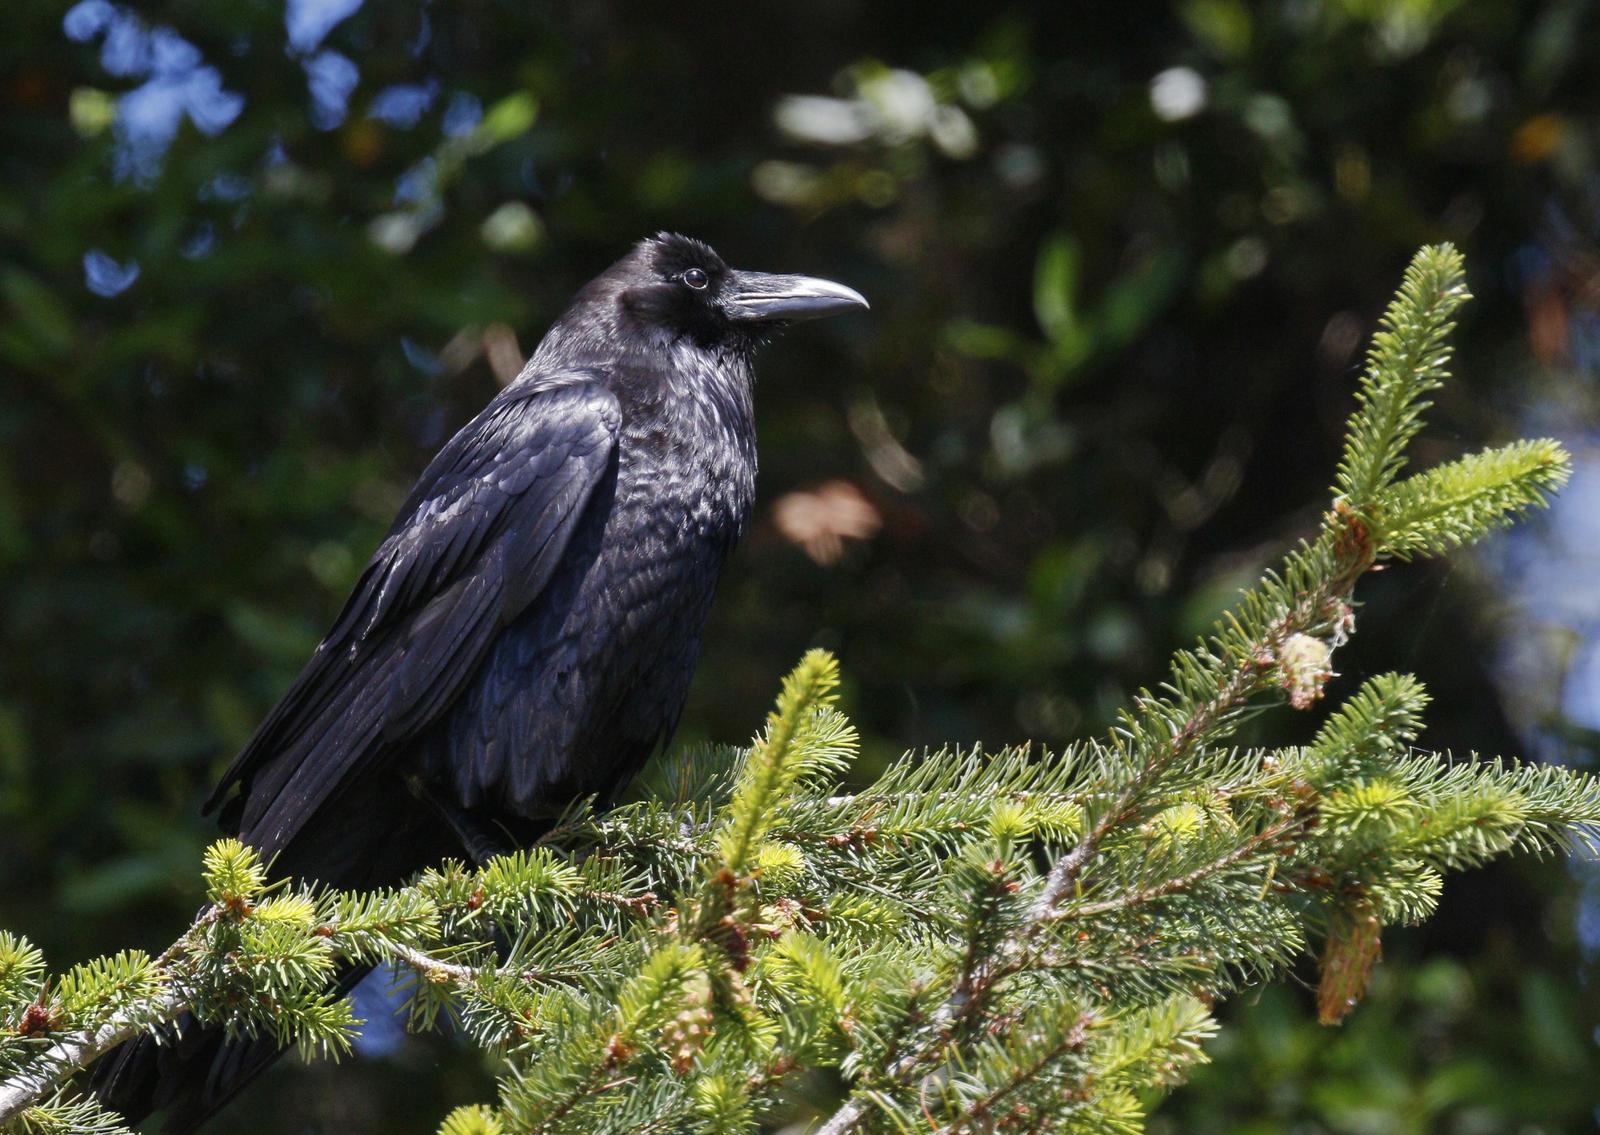 Common Raven Photo by Emily Willoughby